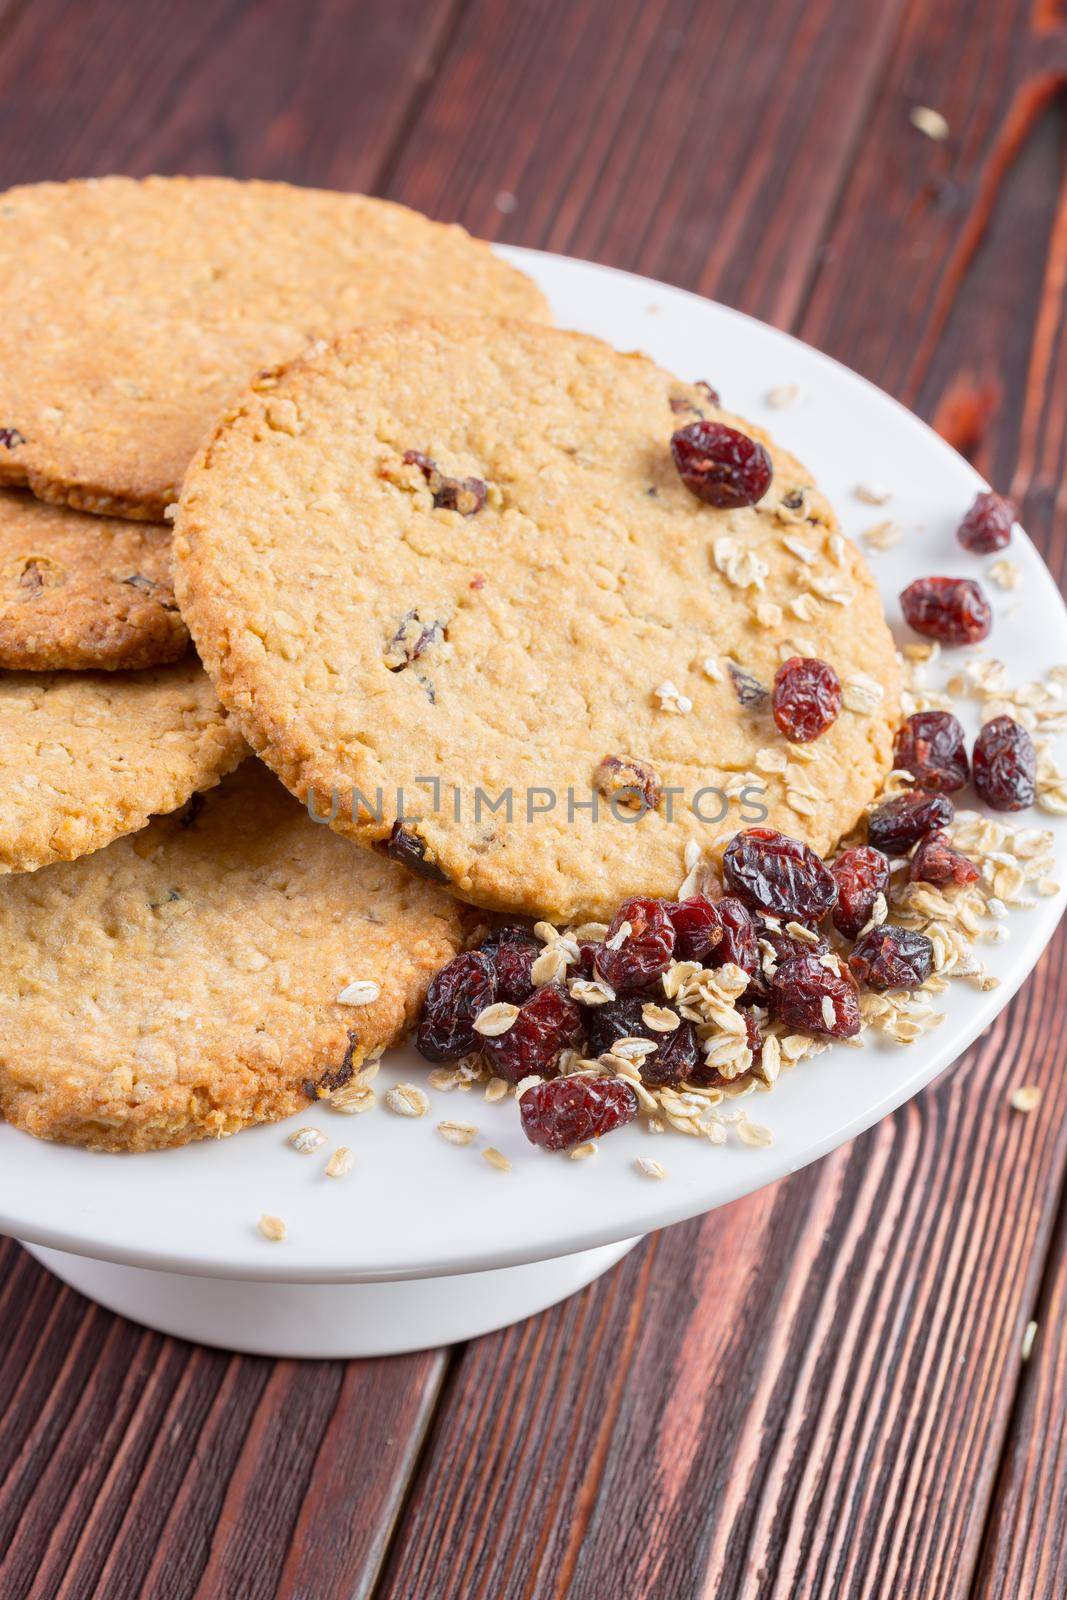 Oat cookies served on wooden table close up by Fabrikasimf